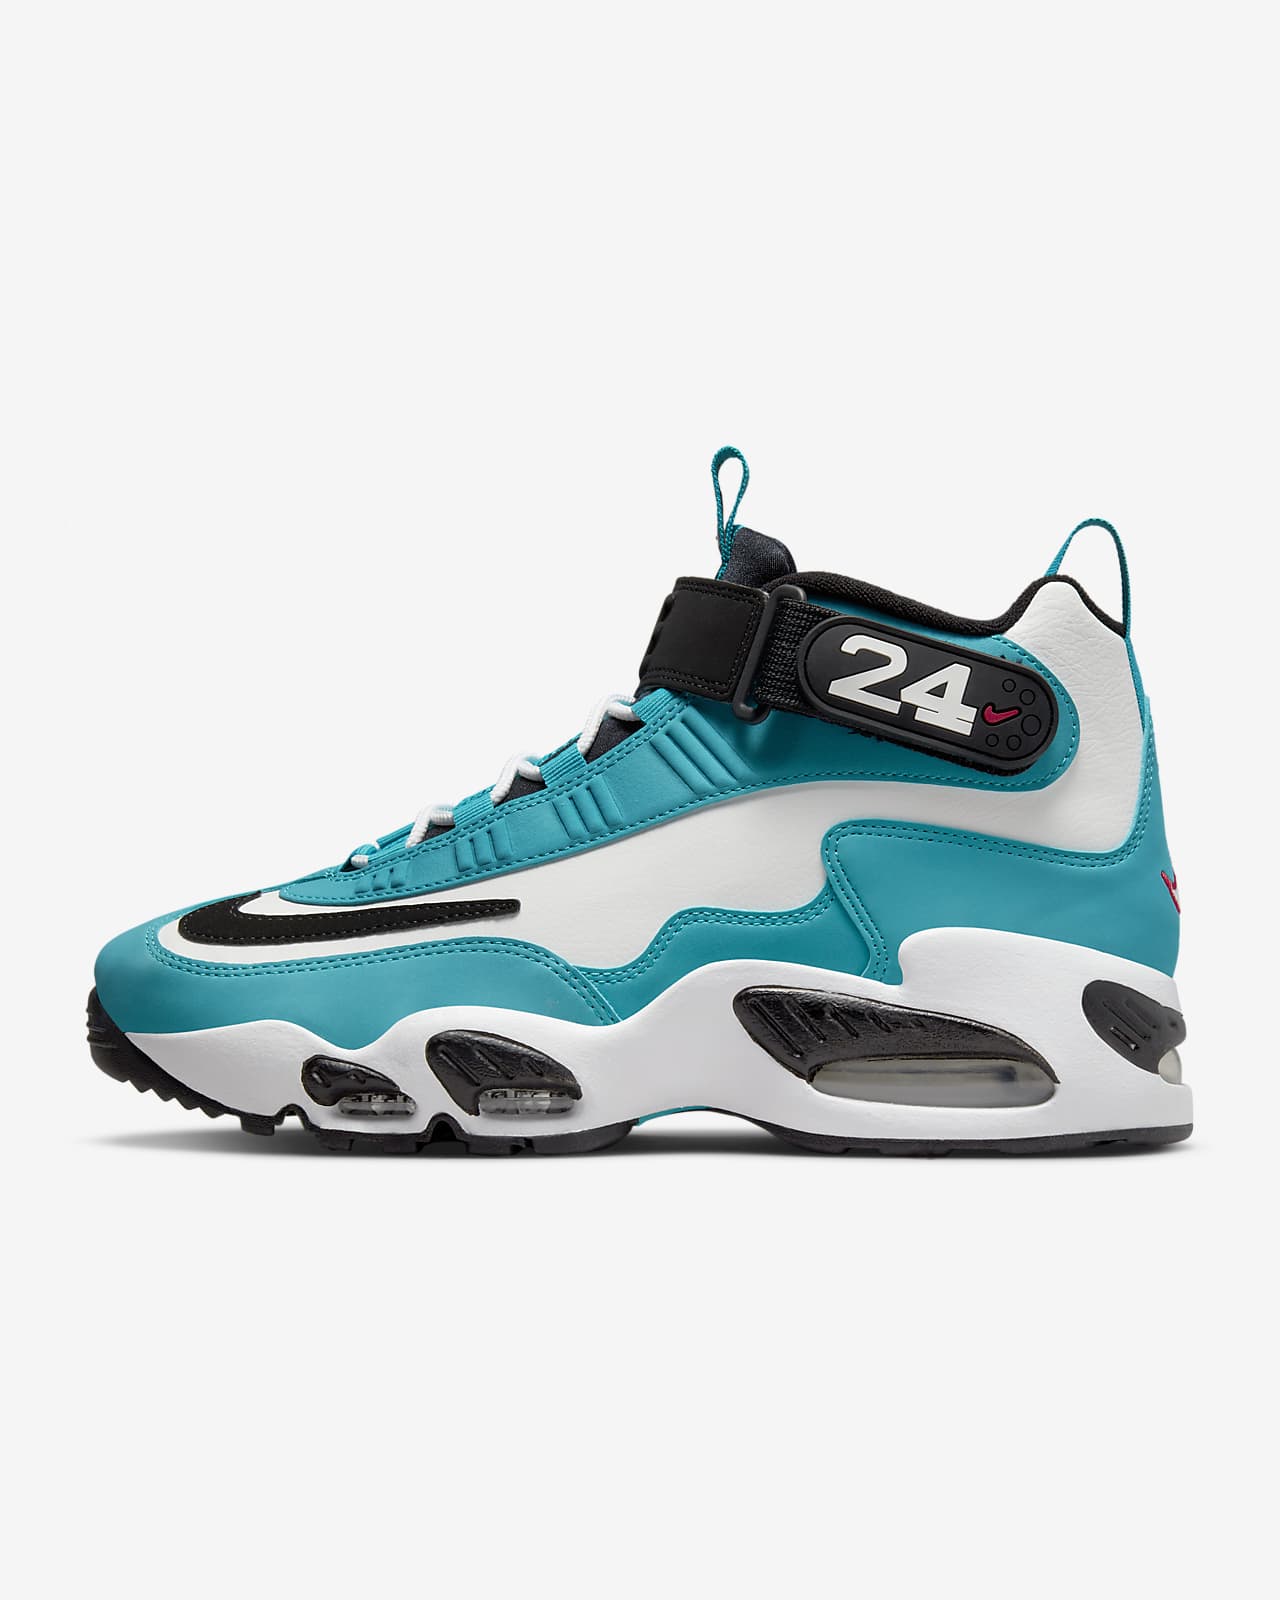 Nike Air Max 360 Griffey: Celebrating the Iconic Sneaker and Its Legacy